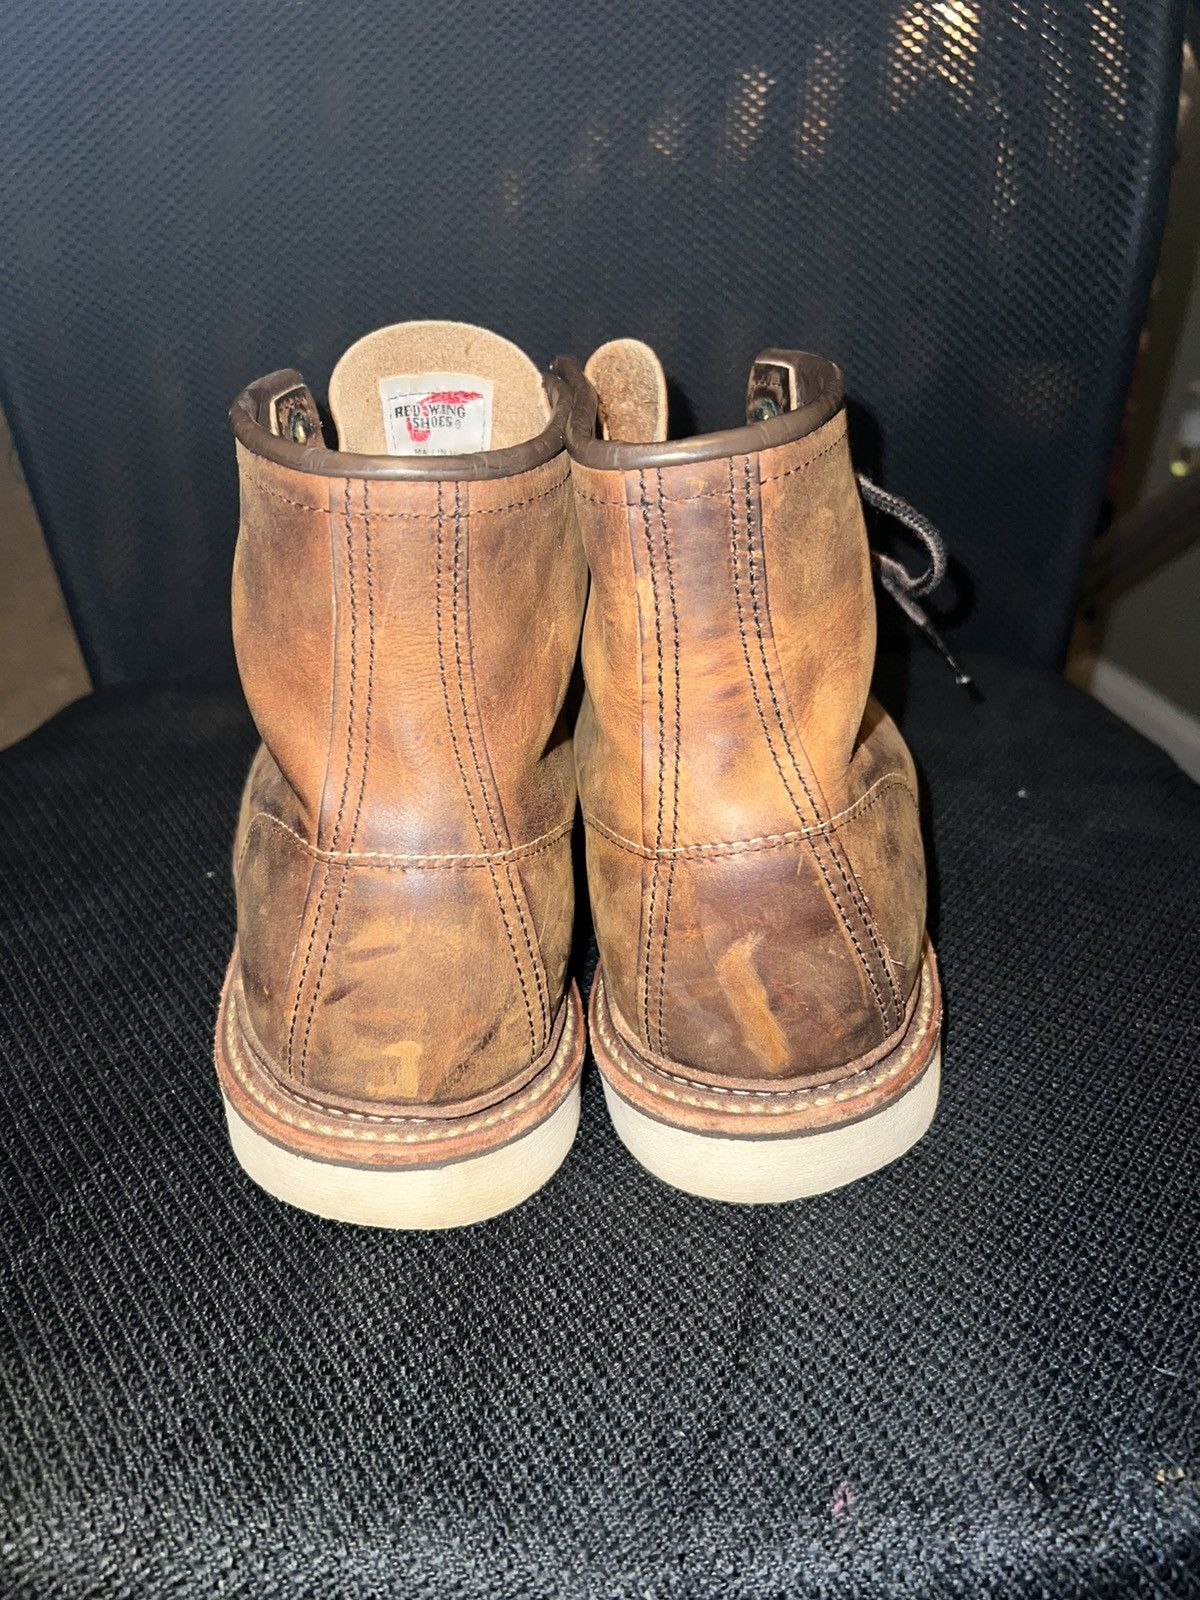 Red Wing Red Wing 1907 size 9 Size US 9 / EU 42 - 7 Thumbnail